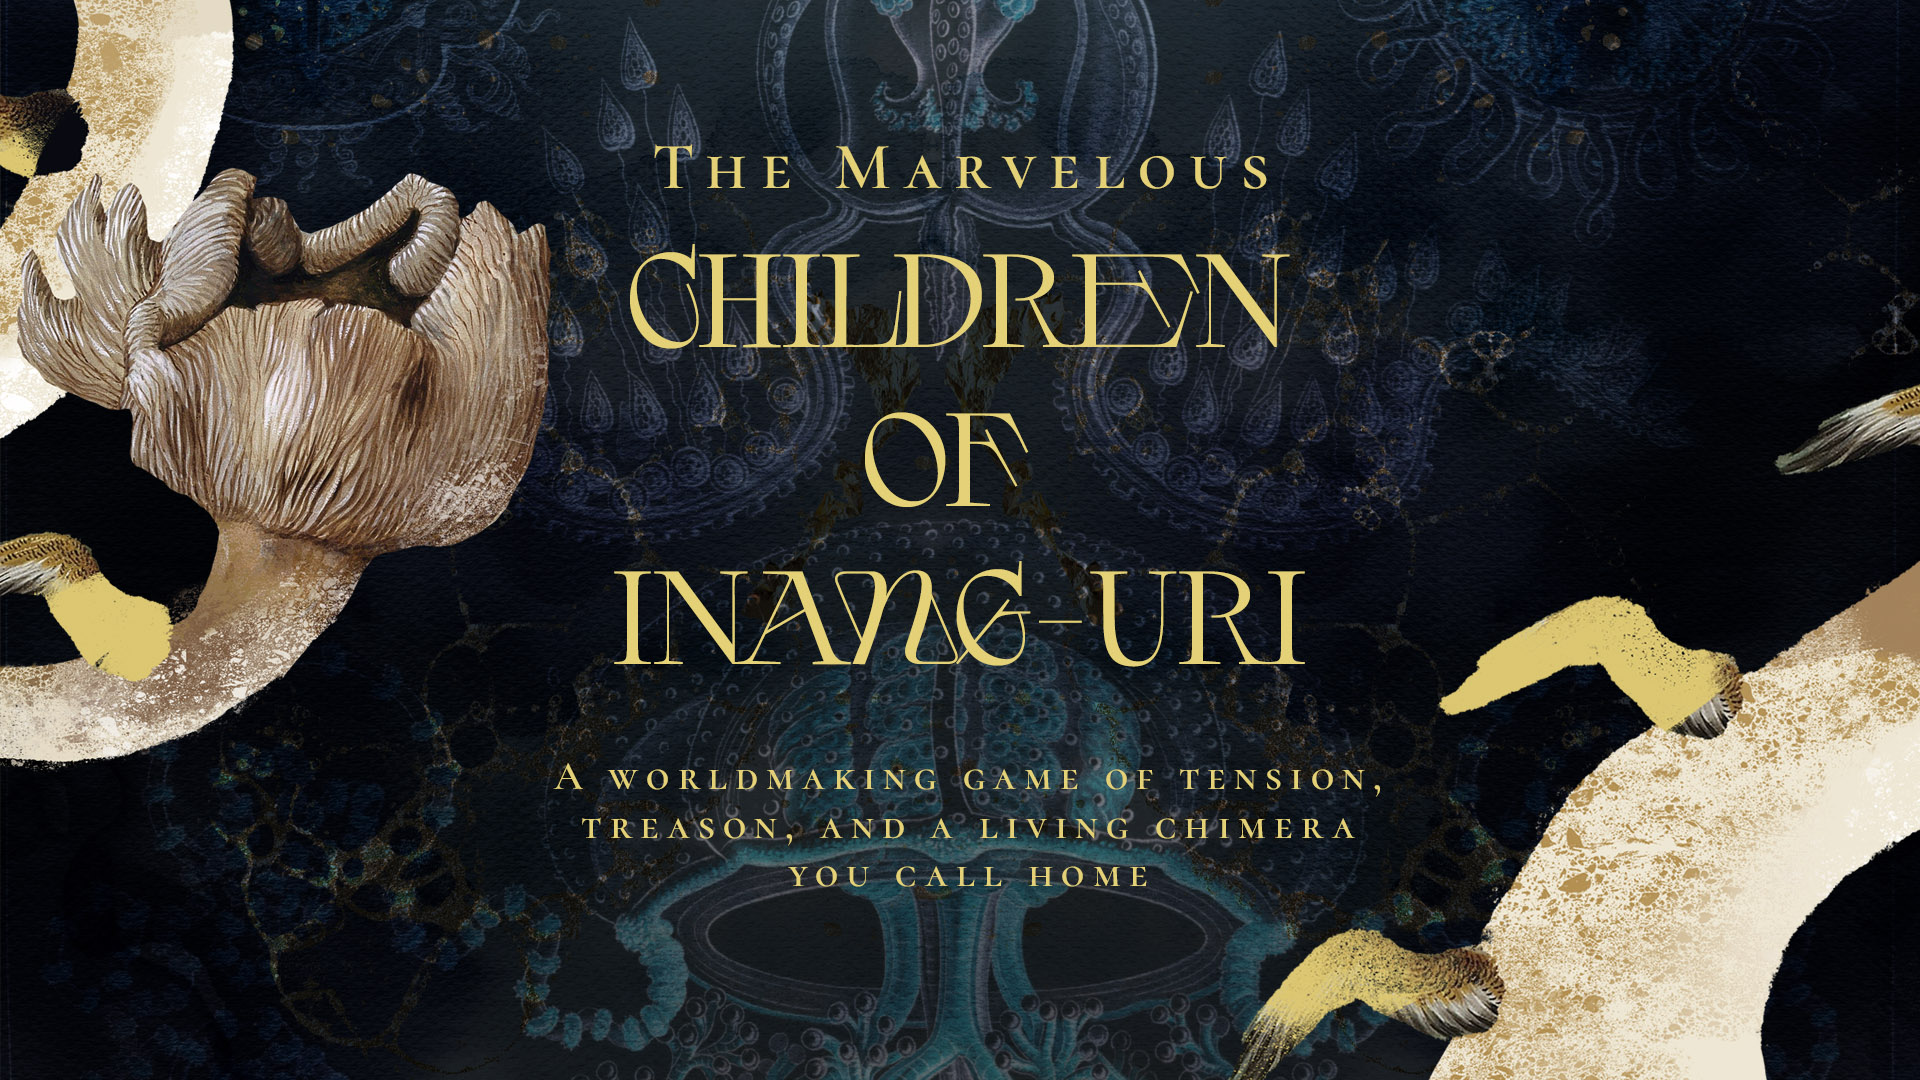 The Marvelous Children of Inang-Uri